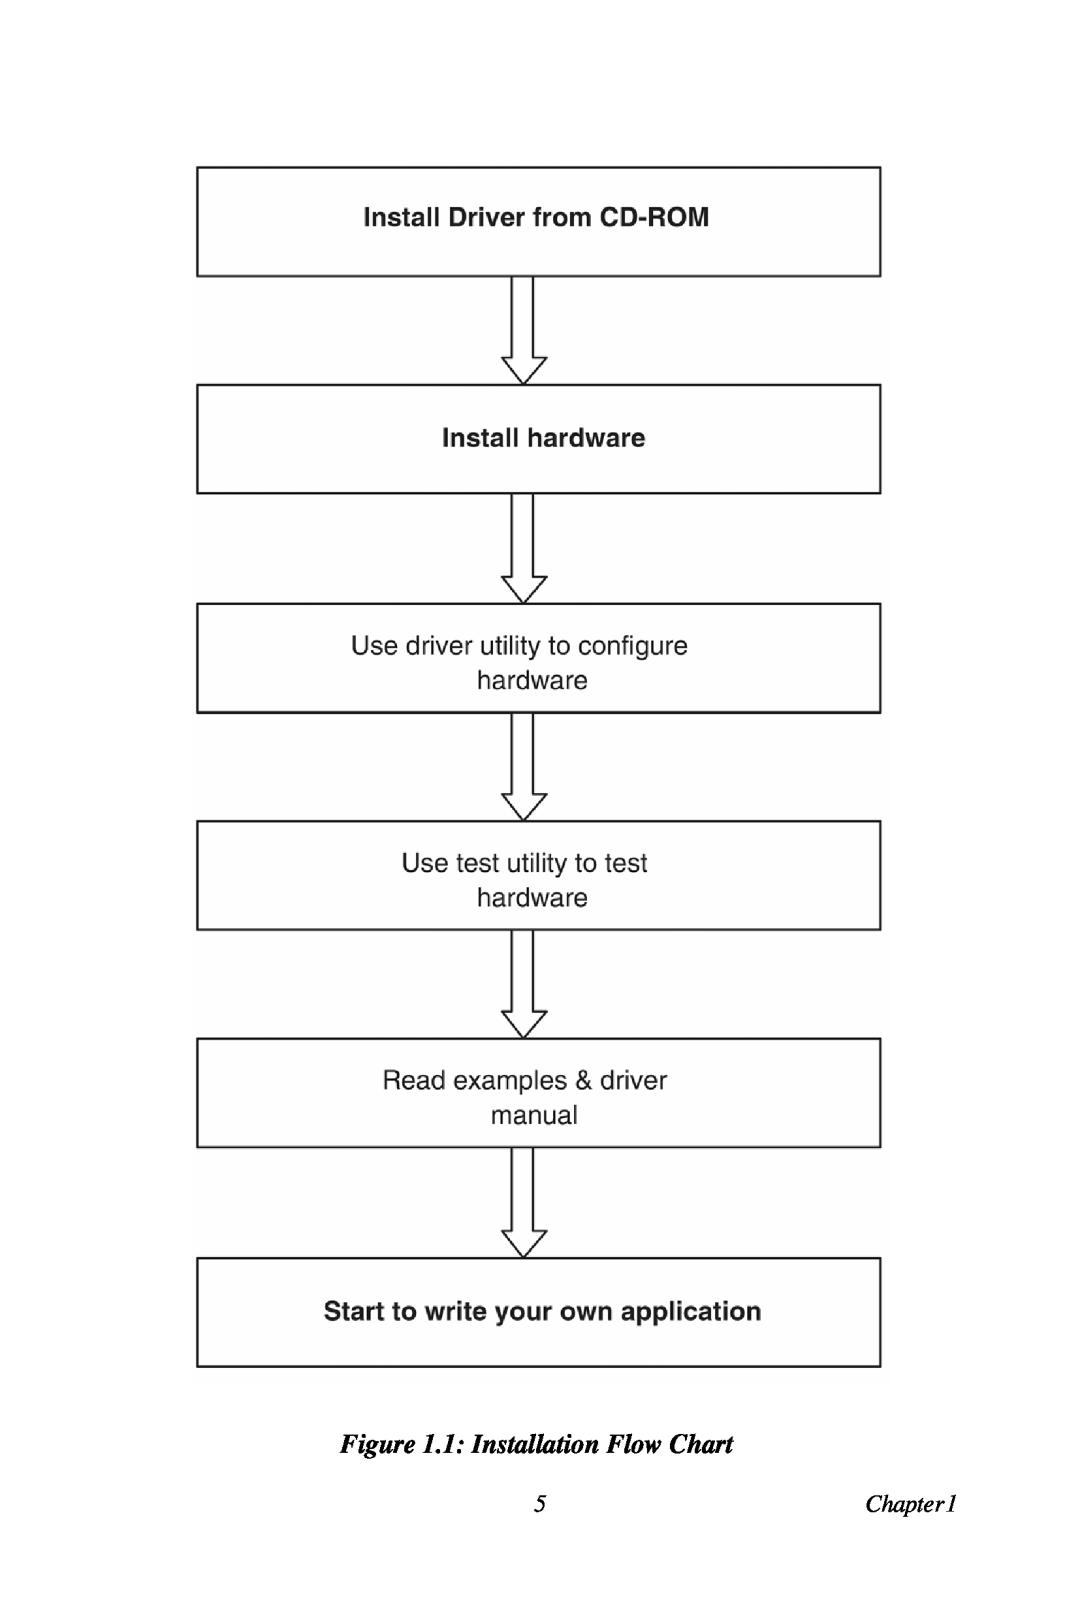 Omega Vehicle Security USB-4761 manual 1 Installation Flow Chart 